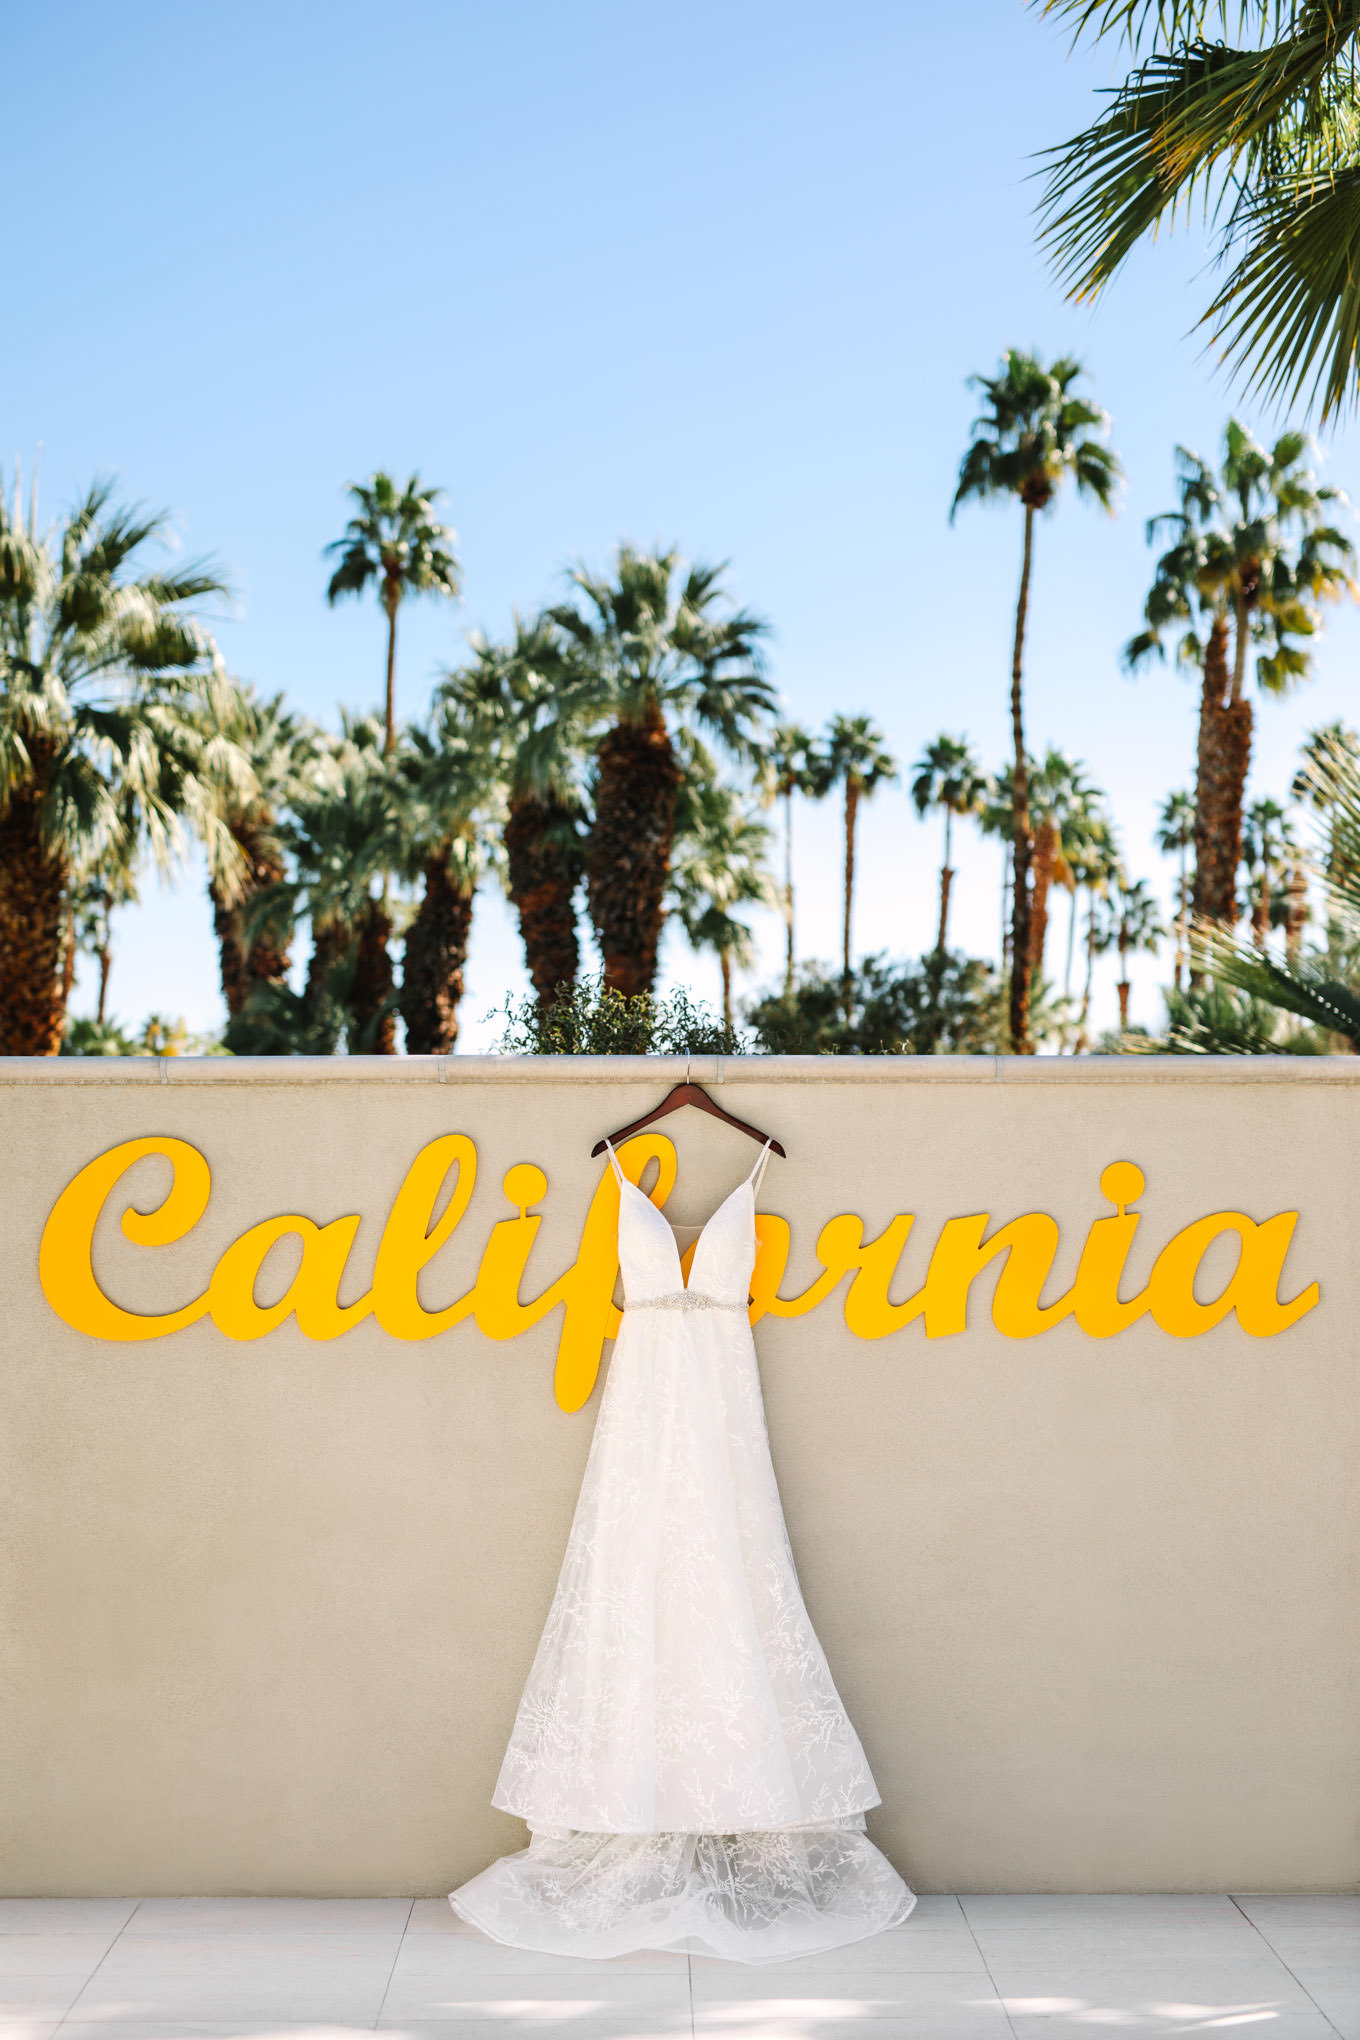 Wedding dress hanging in Palm Desert | Engagement, elopement, and wedding photography roundup of Mary Costa’s favorite images from 2020 | Colorful and elevated photography for fun-loving couples in Southern California | #2020wedding #elopement #weddingphoto #weddingphotography   Source: Mary Costa Photography | Los Angeles